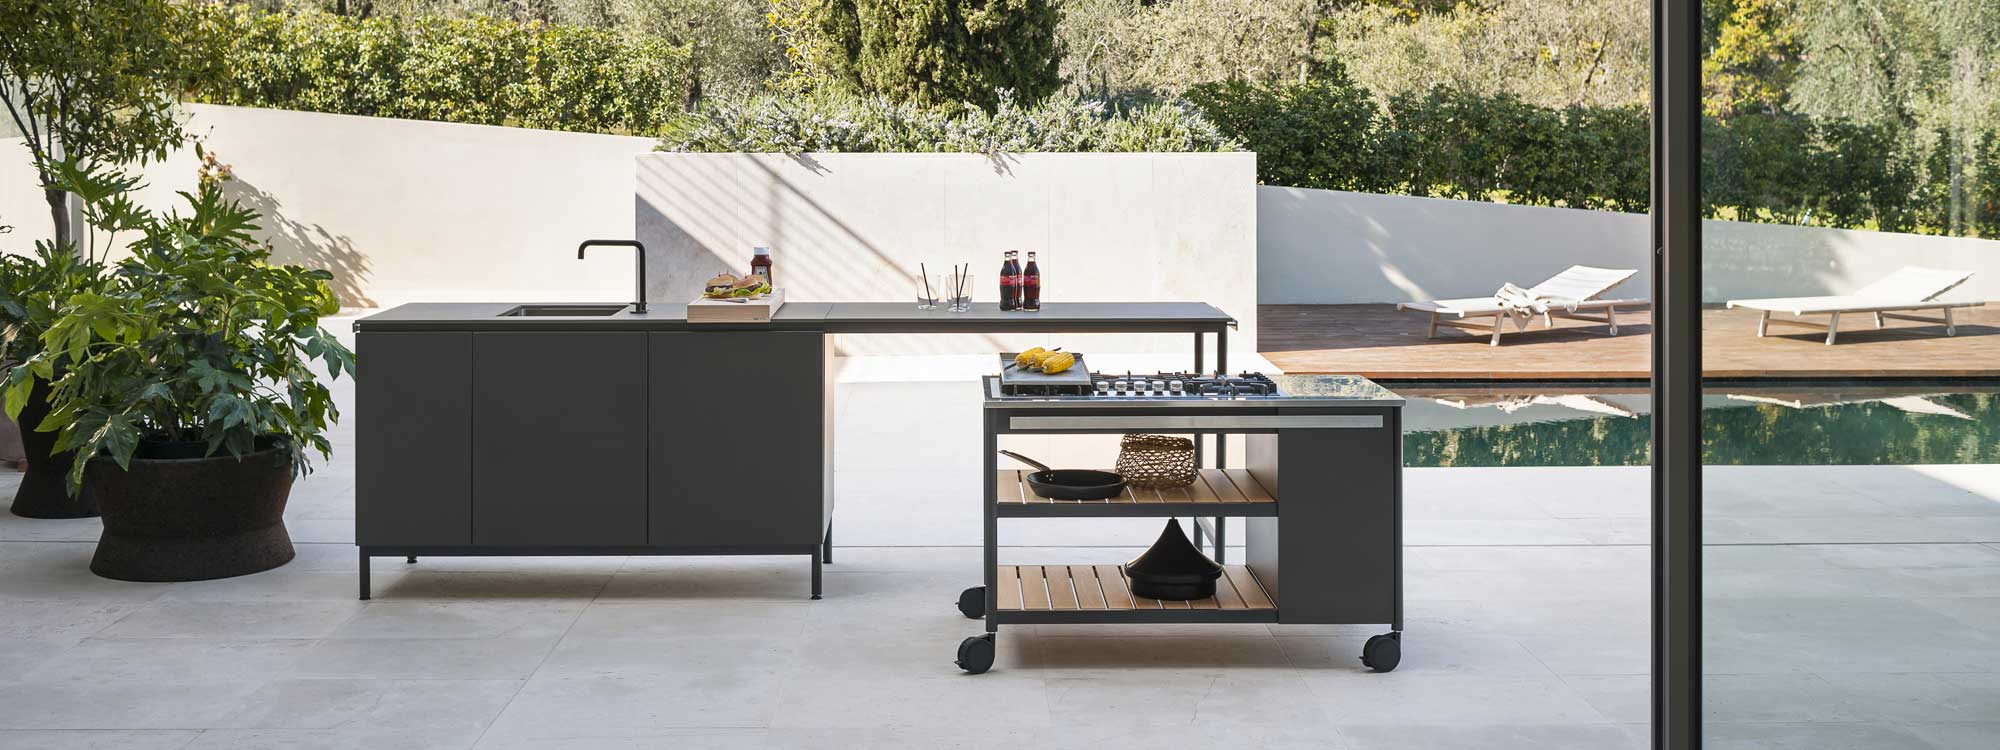 Norma outdoor kitchen is a modular BBQ & modern stainless steel BBQ by Rodolfo Dordoni for RODA luxury quality BBQ company, Italy.